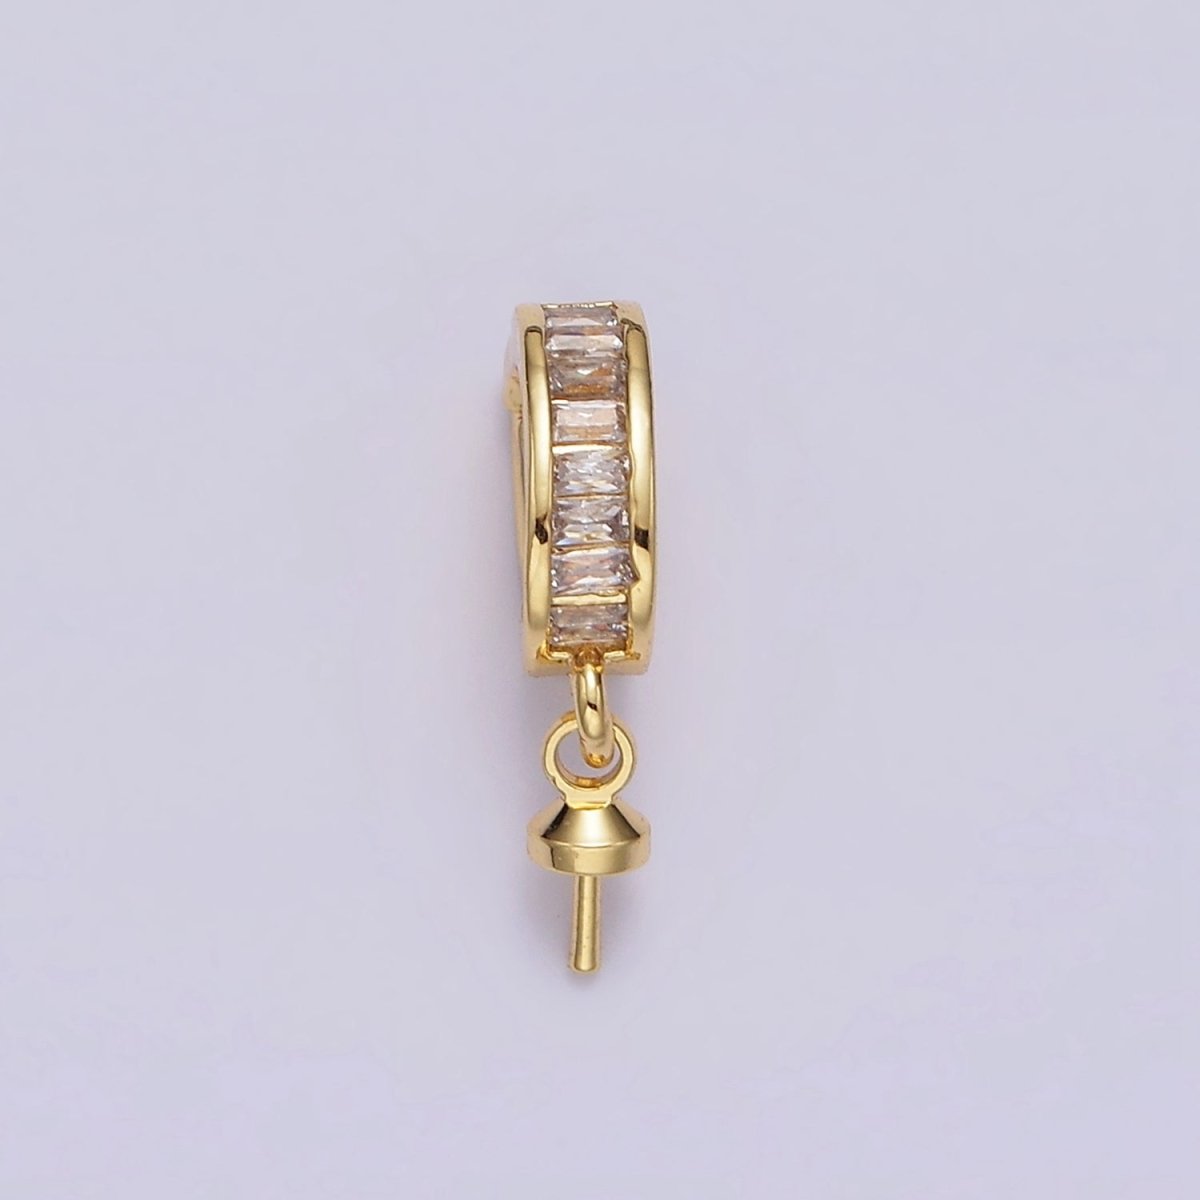 14k Gold Filled Peg Bail Caps Hold for Half Drilled Pearls and Beads CZ Bail Charm Jewelry Findings Supplies Z-470 - DLUXCA